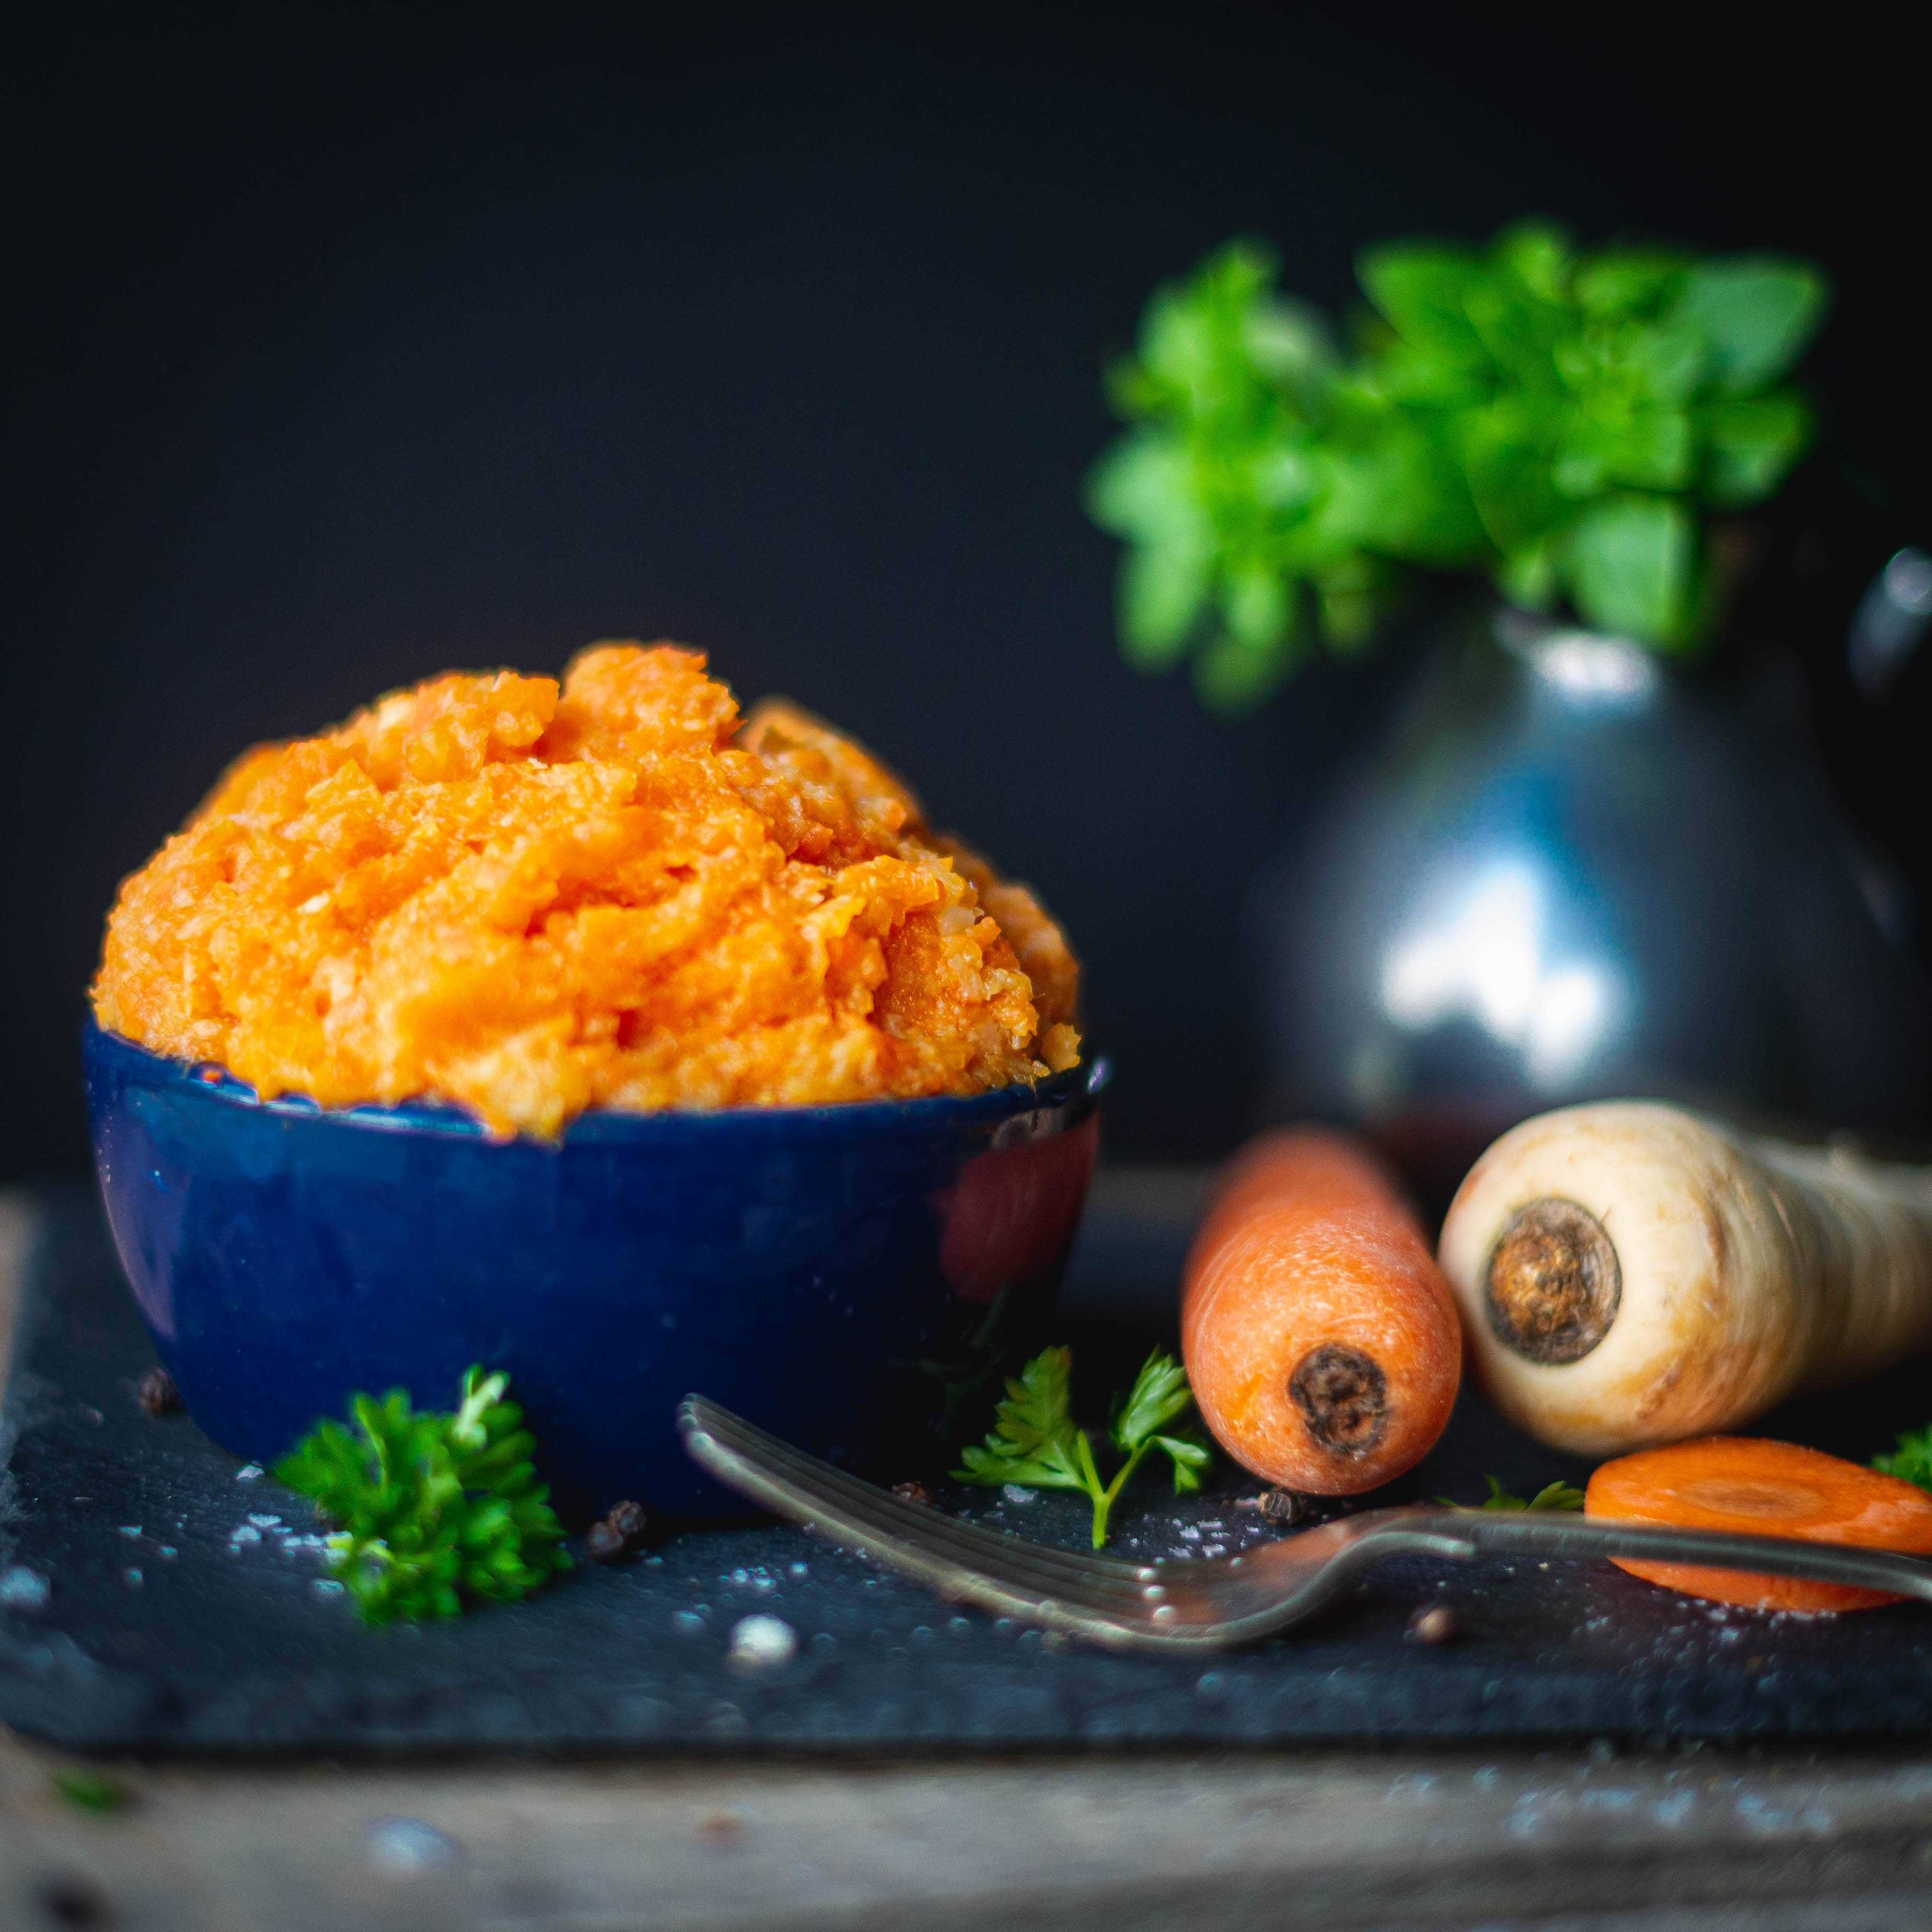 Carrot and Parsnip Mash (Serves 2)